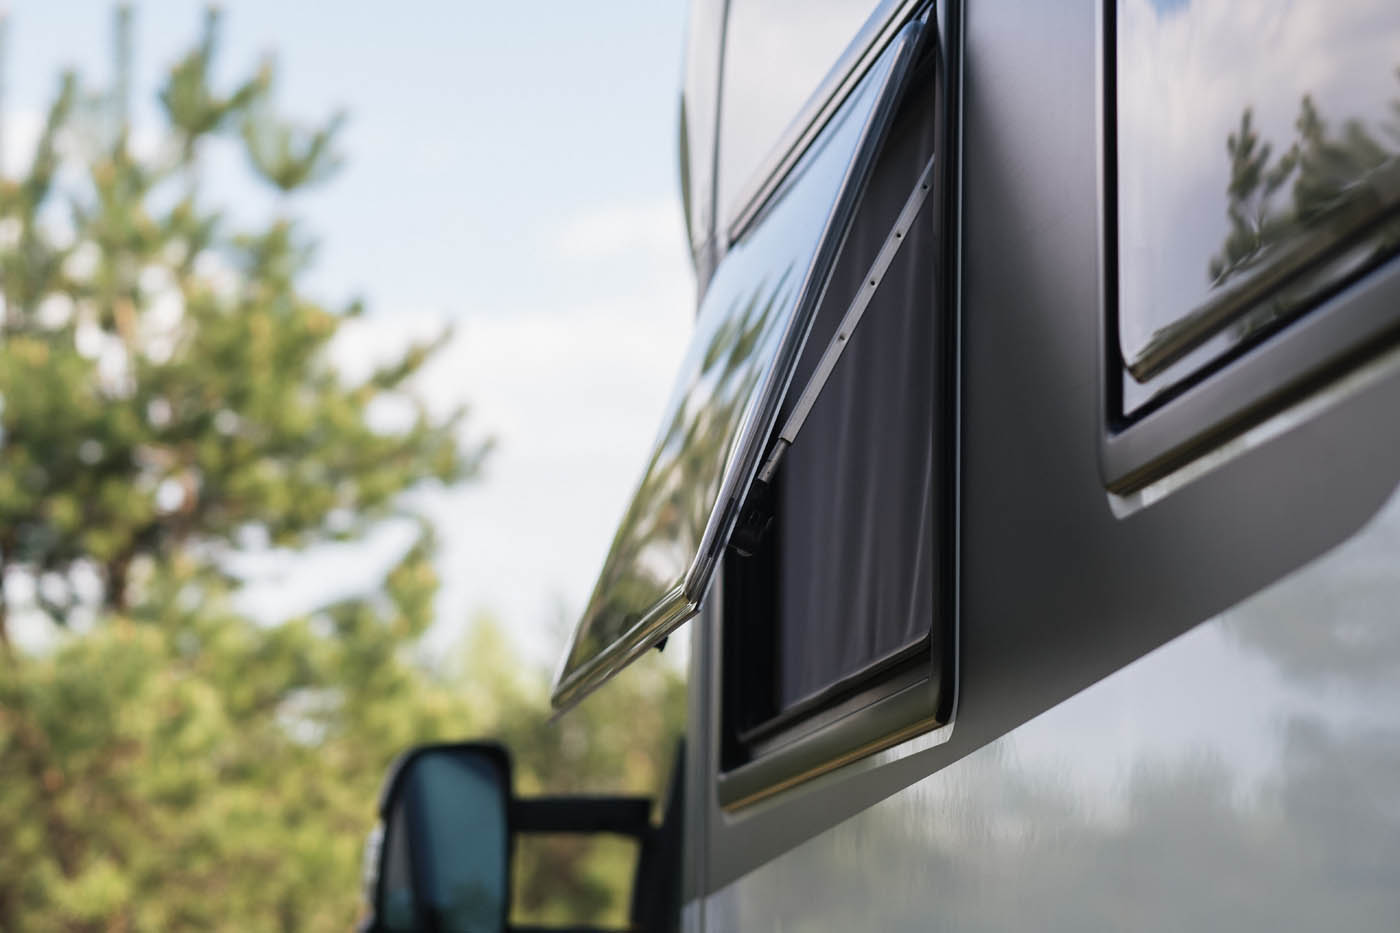 An open RV window airing out a freshly cleaned RV provided by Dapper Pros.